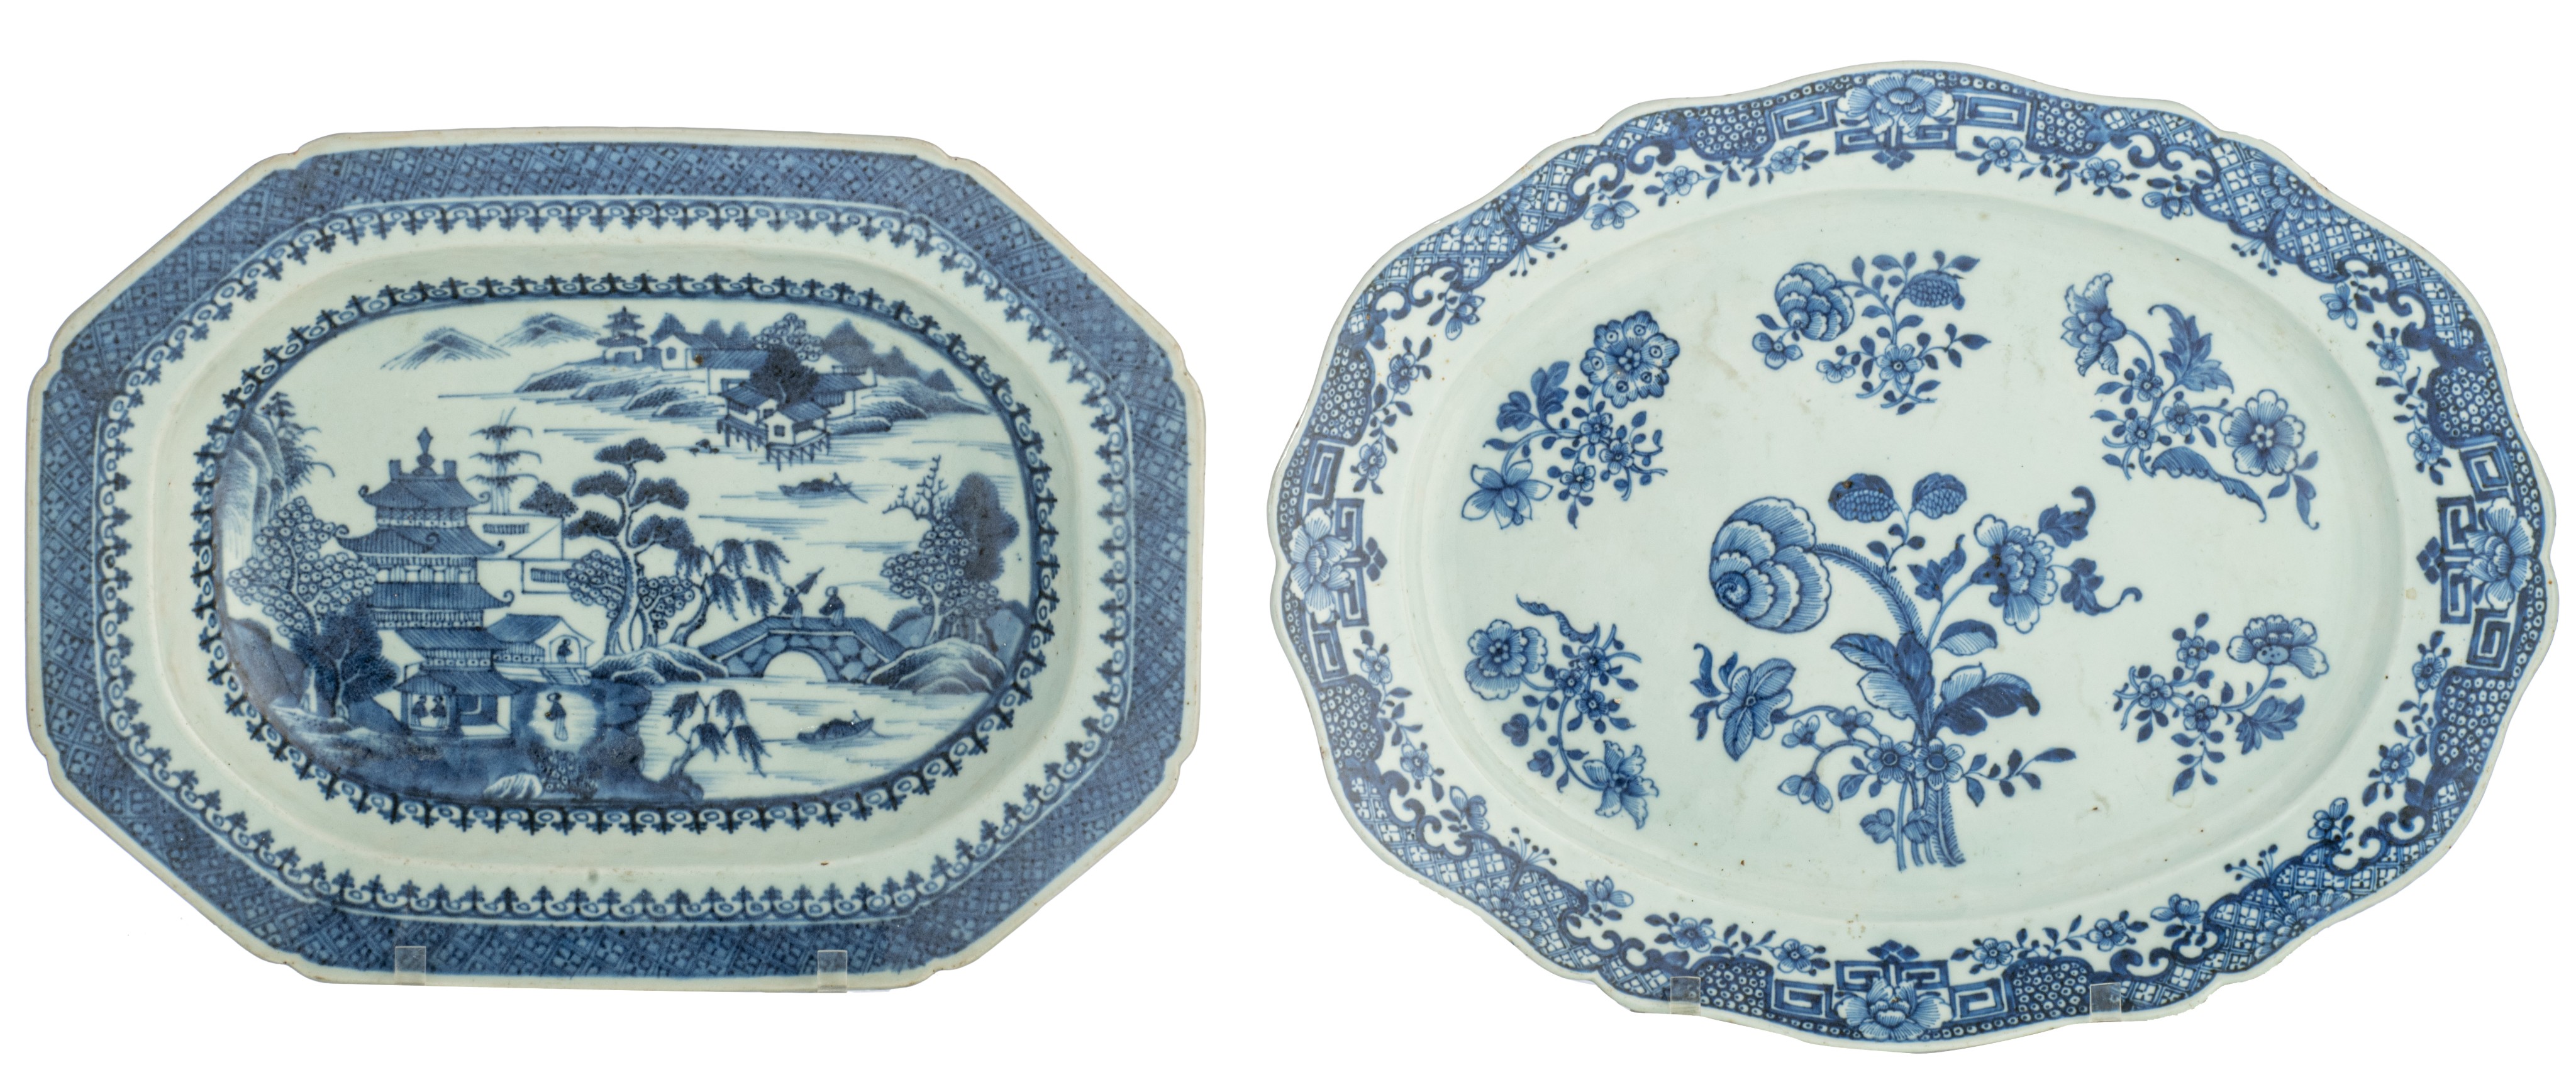 A Chinese blue and white export tureen and a matching plate, Qianlong period, H 19 - W 29,5 cm - add - Image 2 of 14